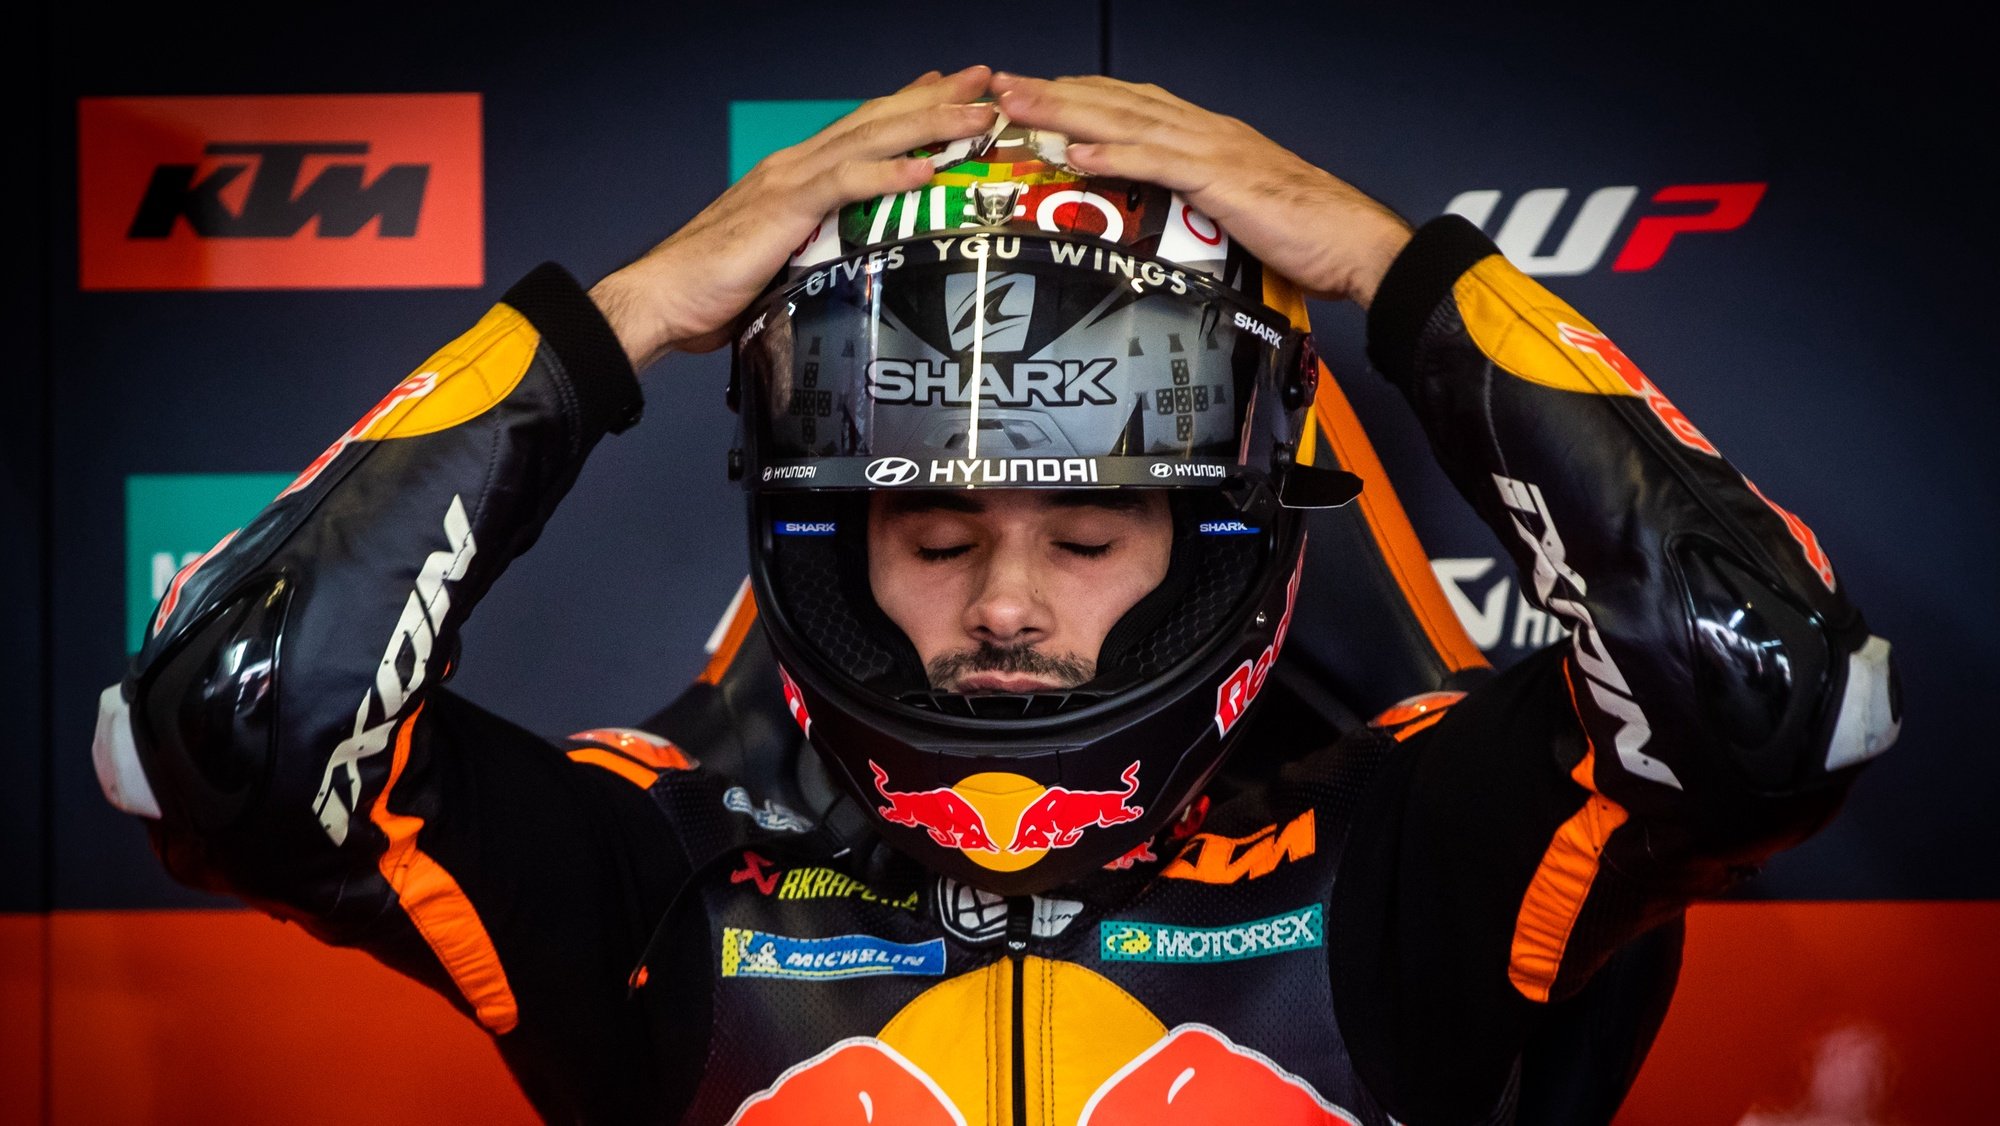 Portuguese rider Miguel Oliveira of Red Bull KTM Factory Racing team puts on his helmet prior to the third practice session for the Grand Prix of Portugal at the Algarve International race track, south of Portugal, 23 April 2022. JOSE SENA GOULAO/LUSA